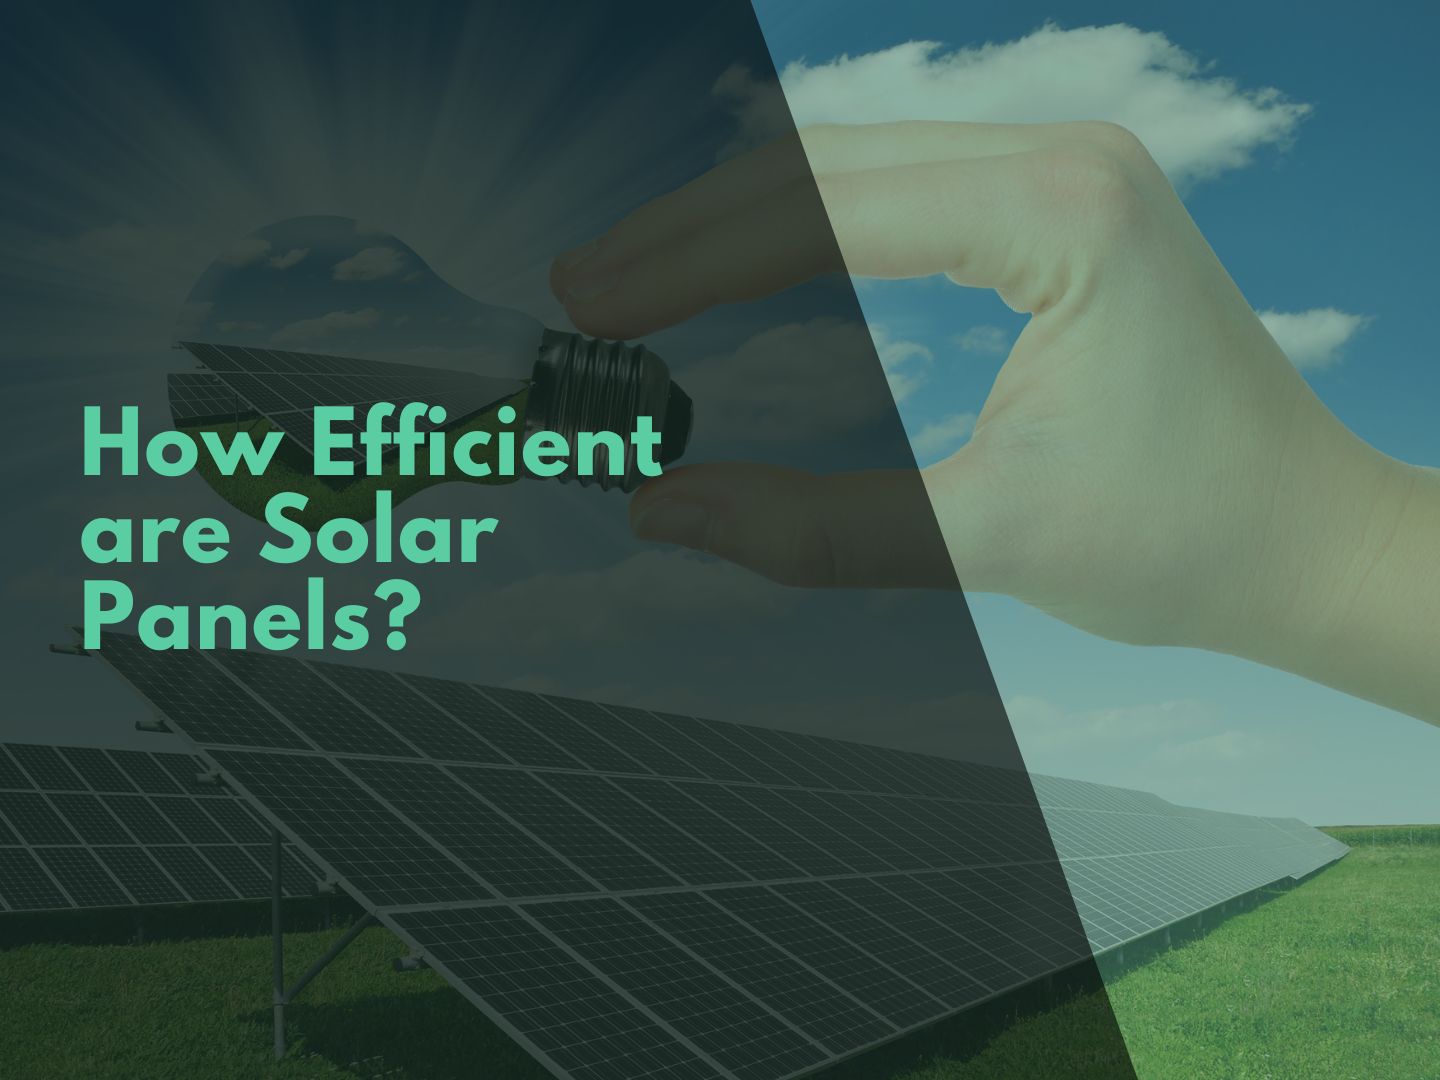 How Efficient are Solar Panels?